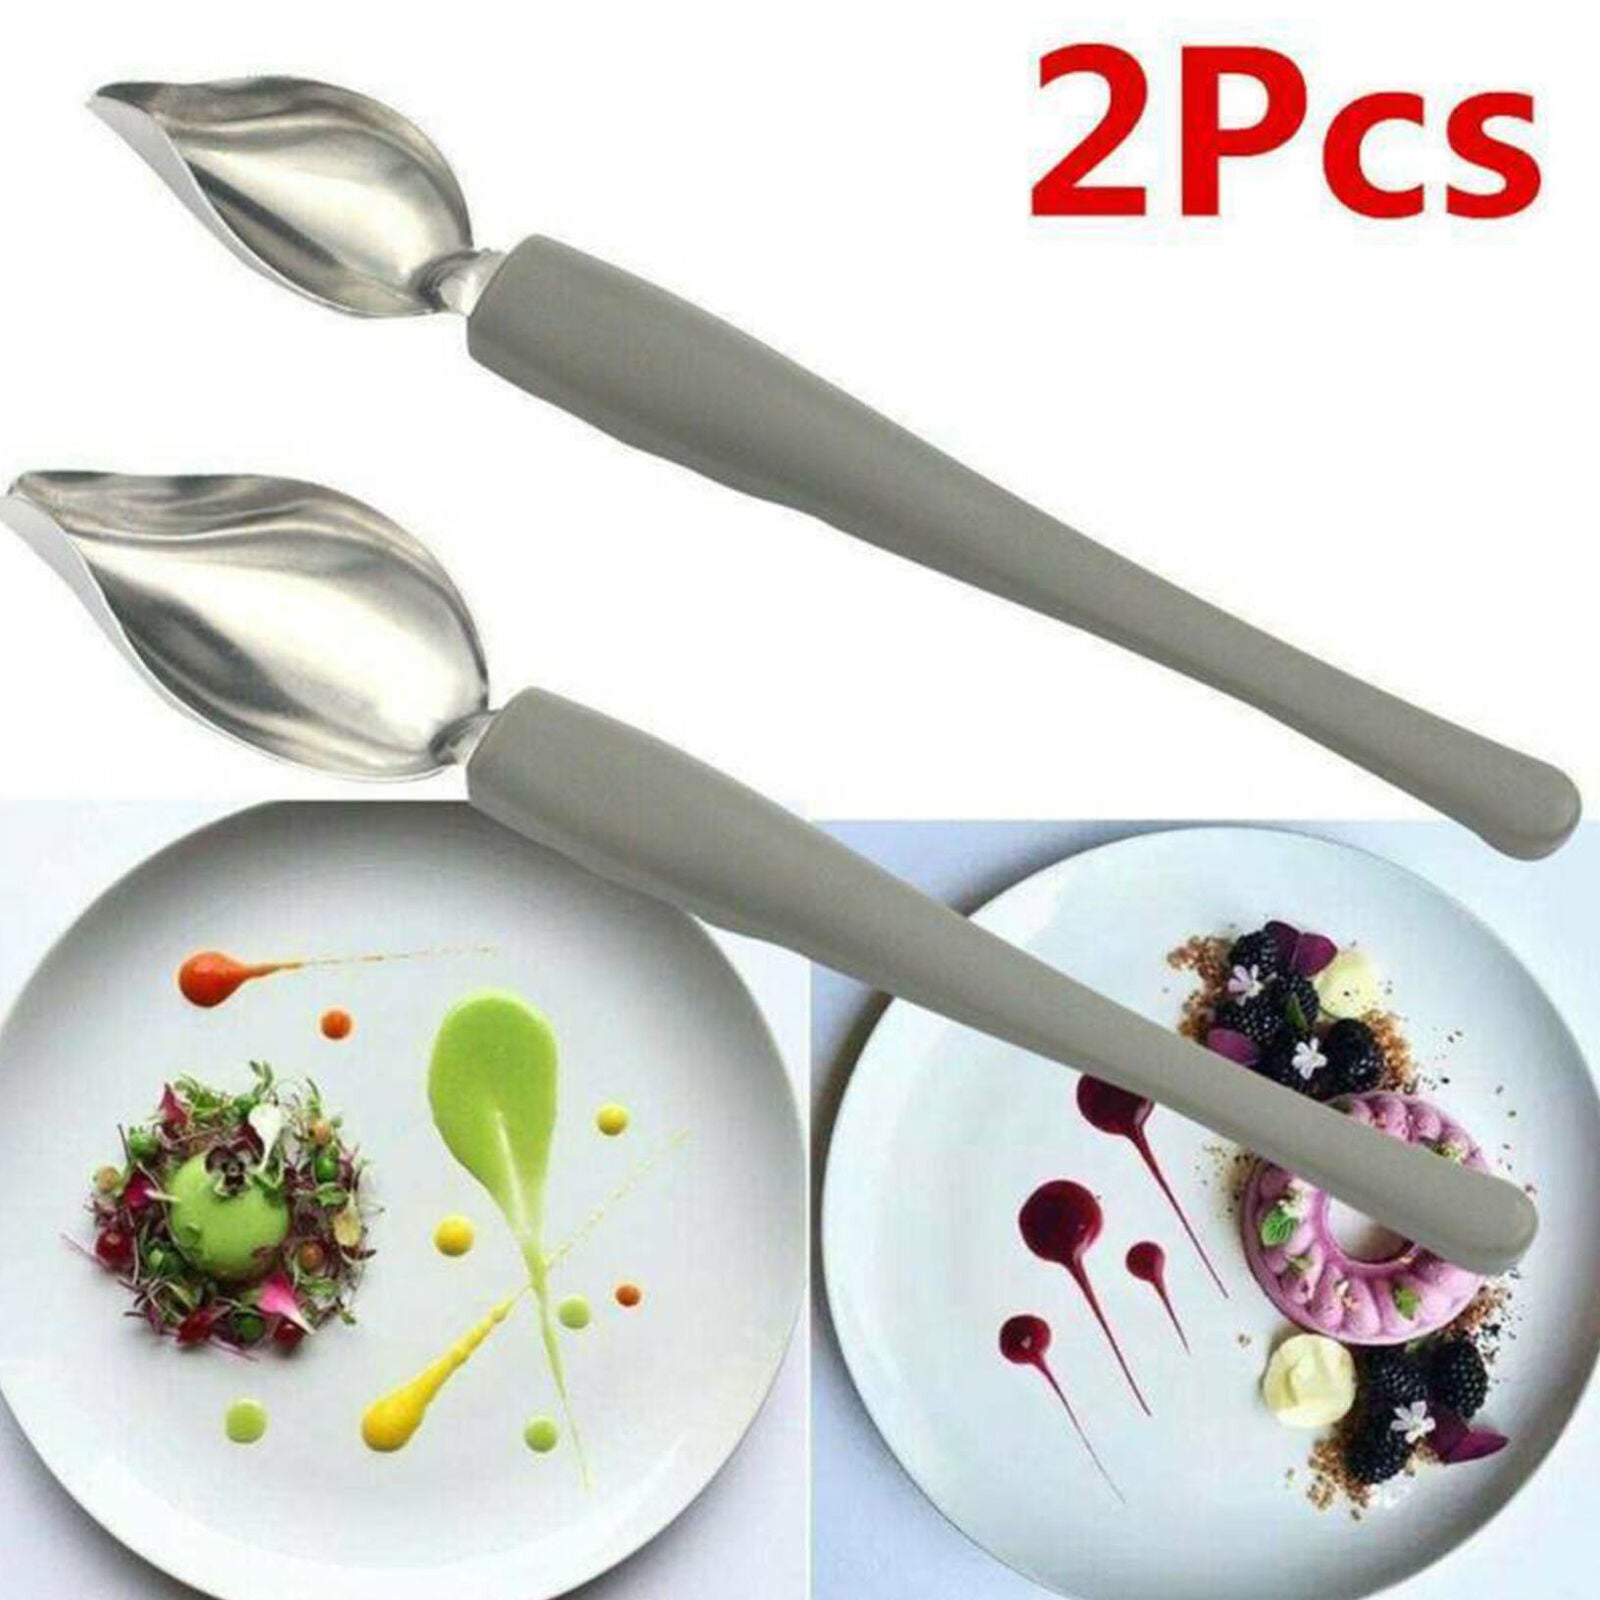 2PCS Chef Valon Sauce Plating Art Pencil Dish Draw Tool Spoon Stainless Steel